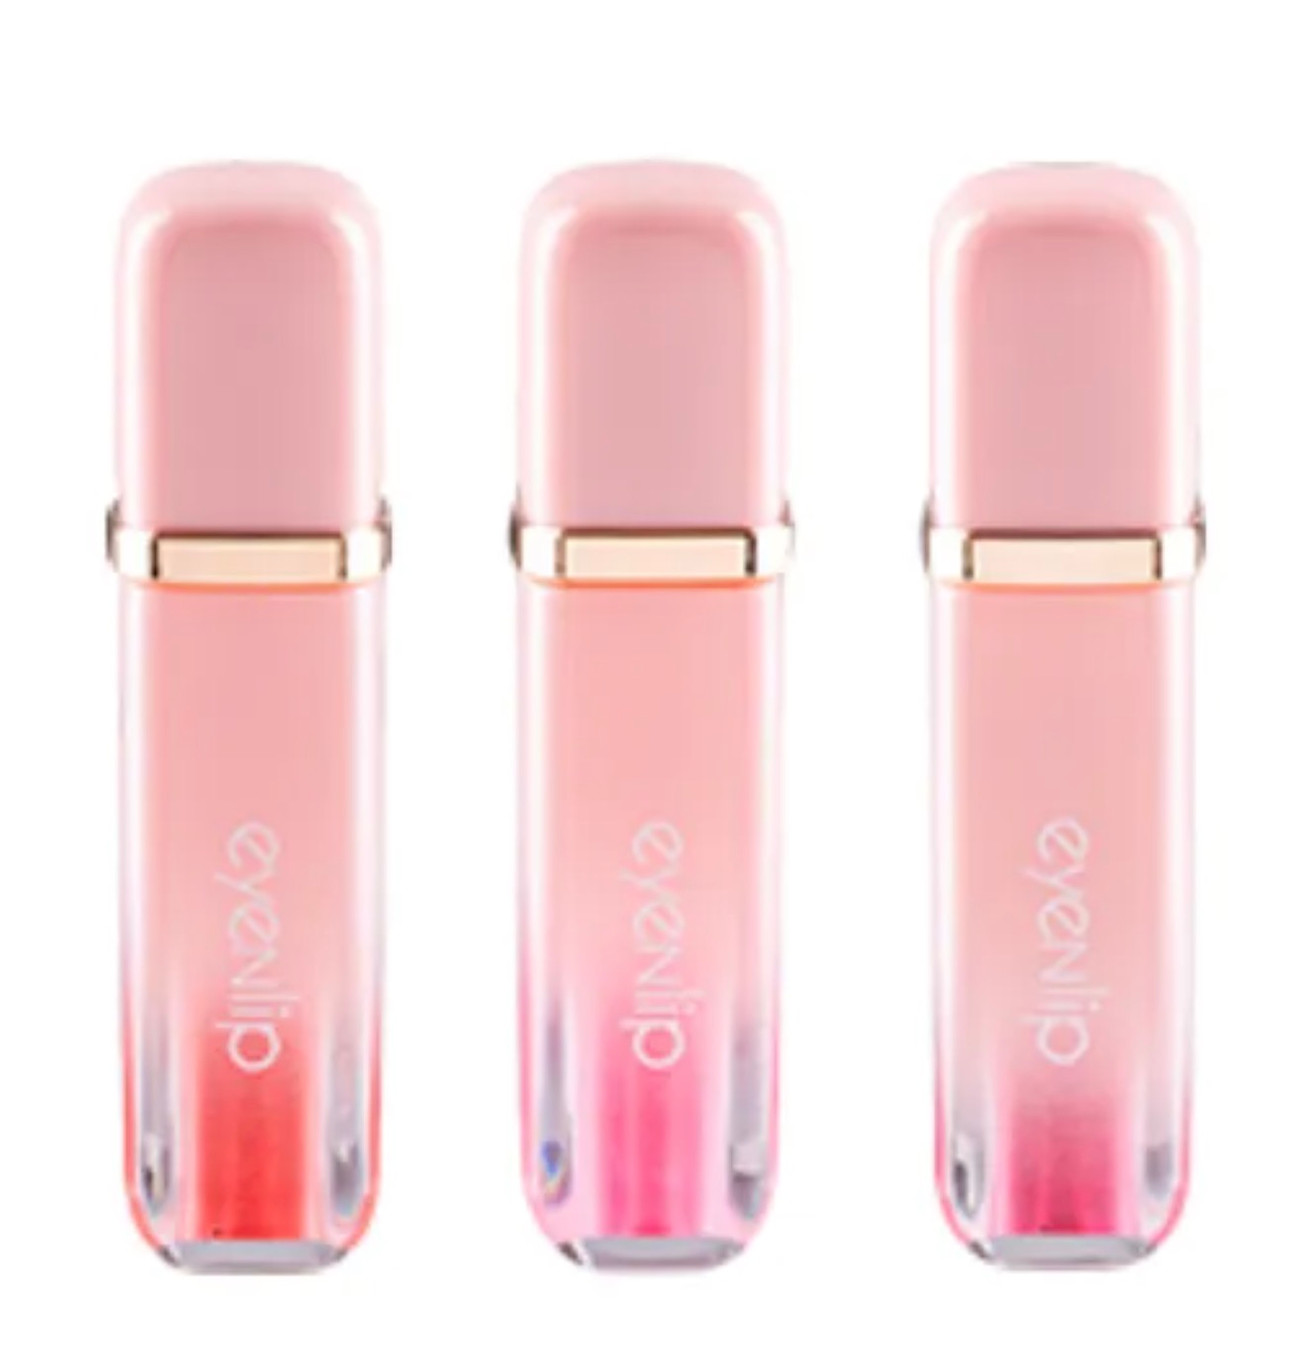 [EYENLIP] Dive Glossy Tint - 3 Colors